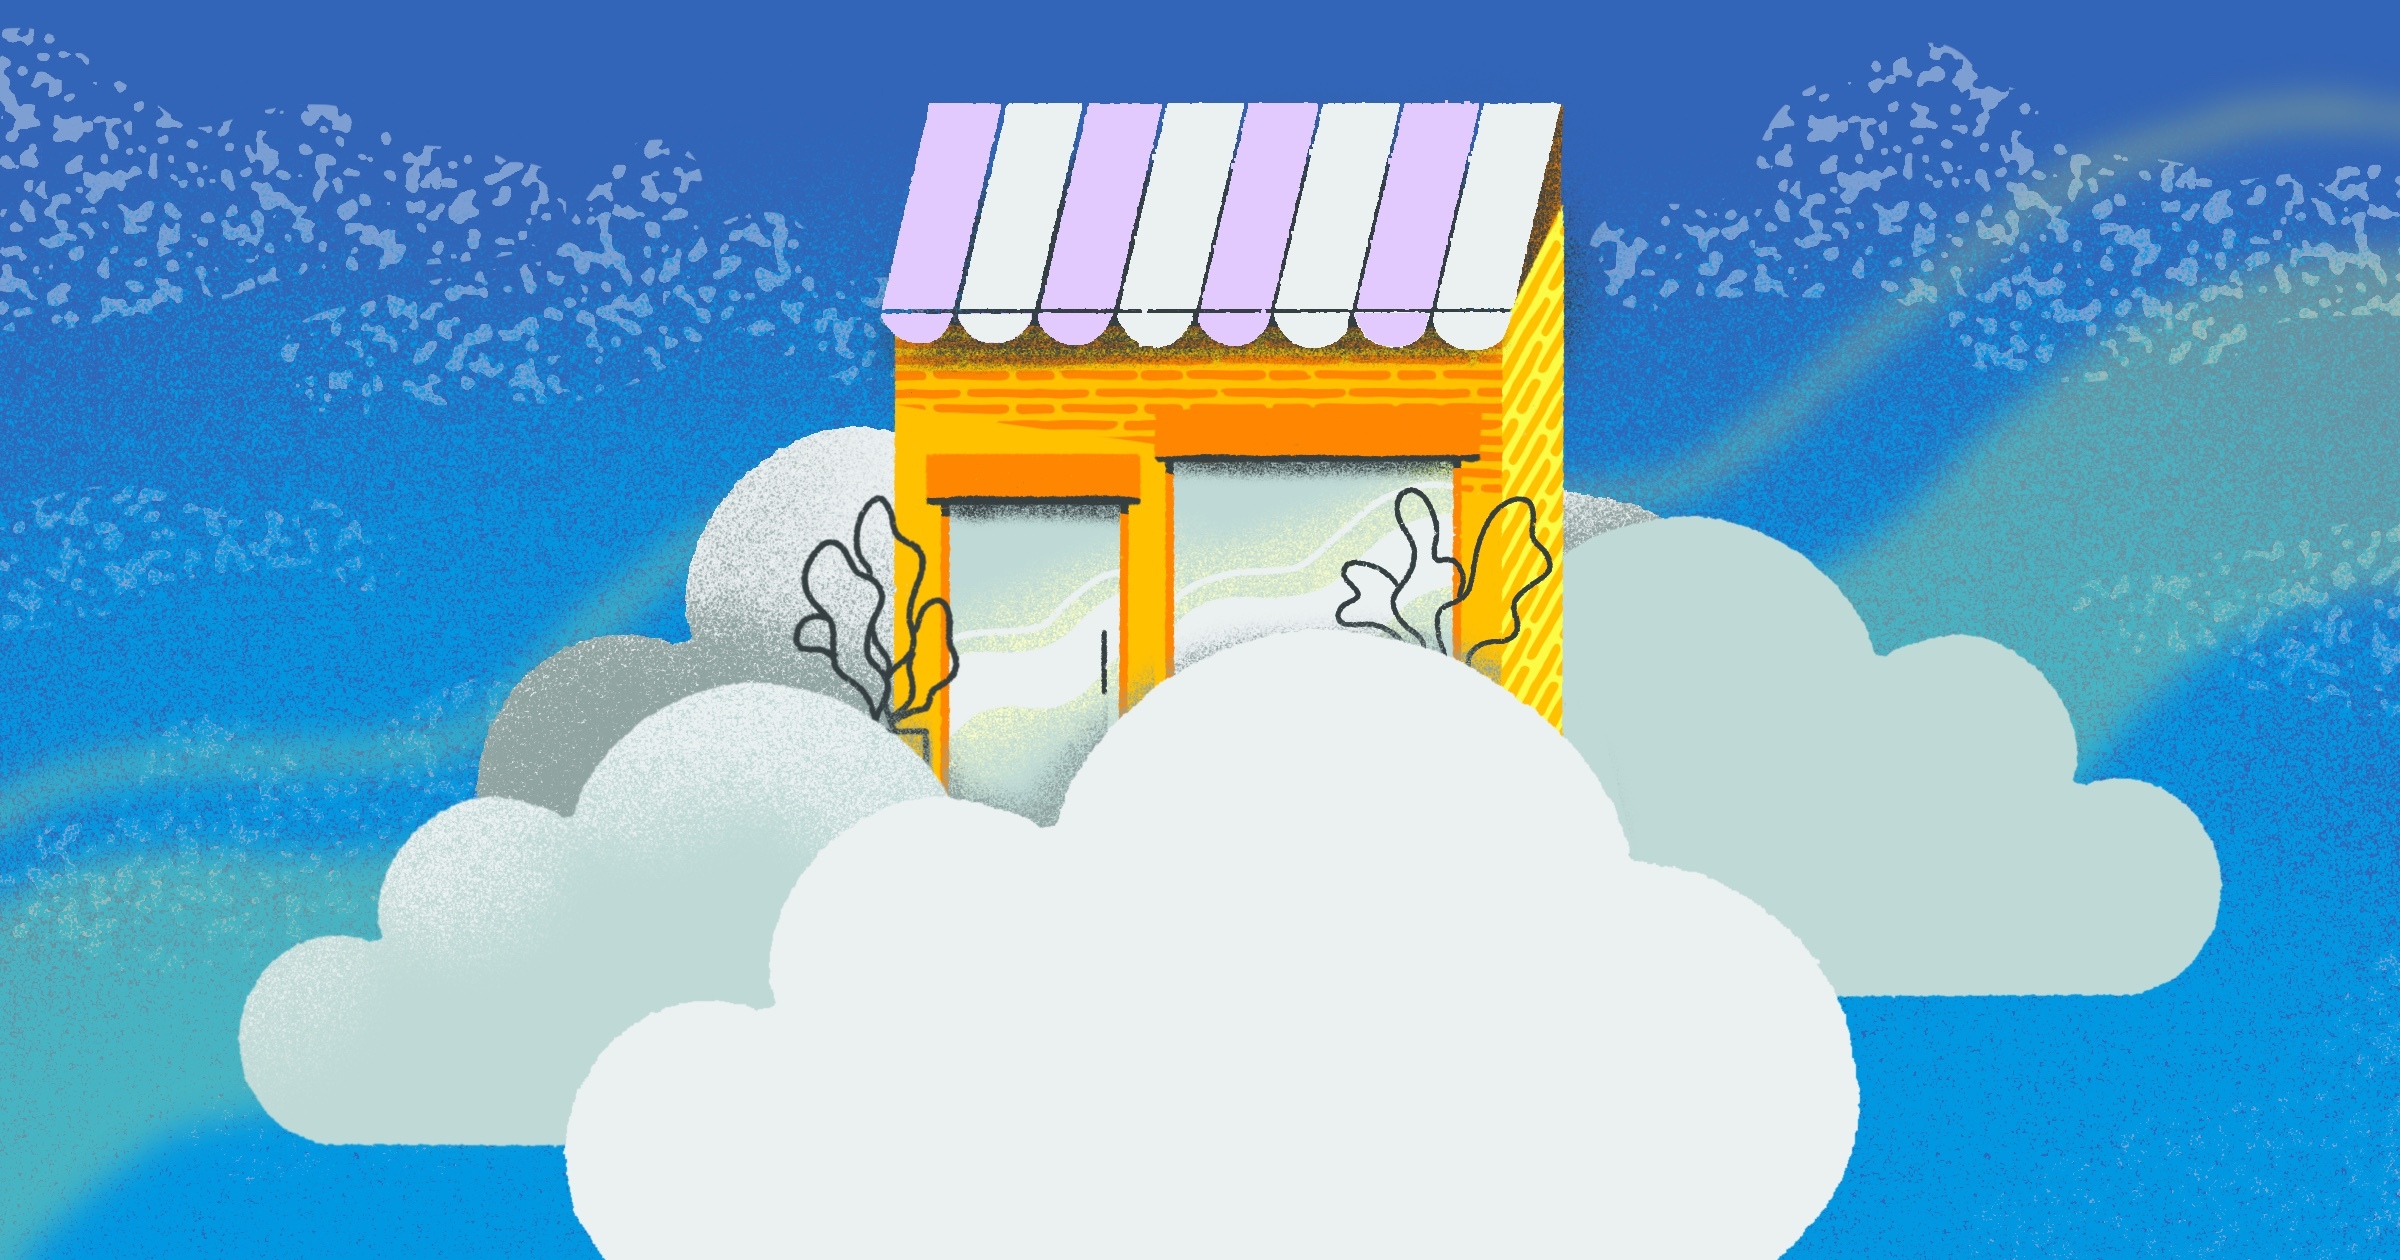 Cloud Backups for Small Businesses. Image shows a graphic of a storefront sitting on a cloud.